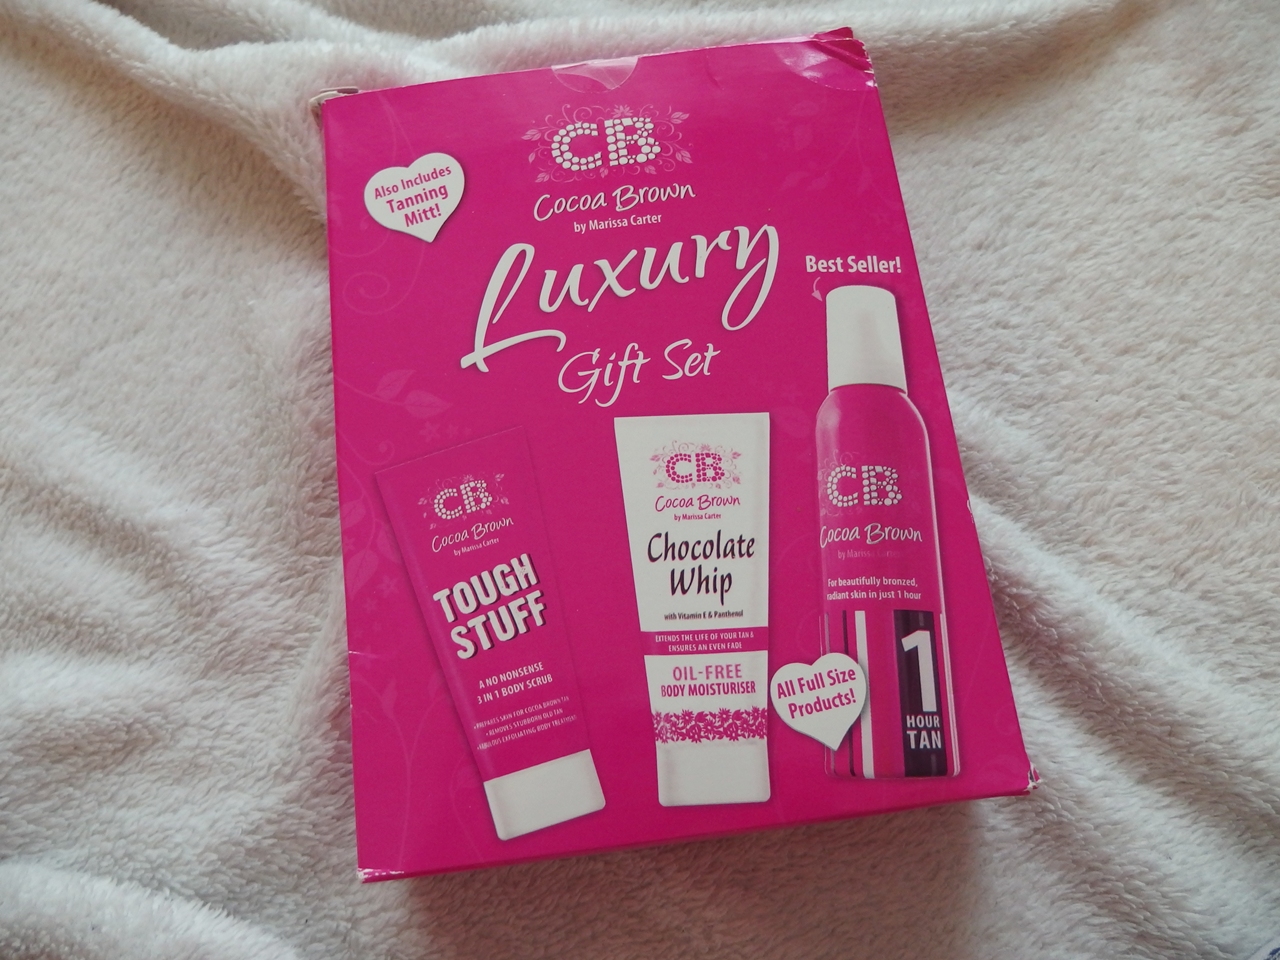 Cocoa Tan Luxury Gift Set Review